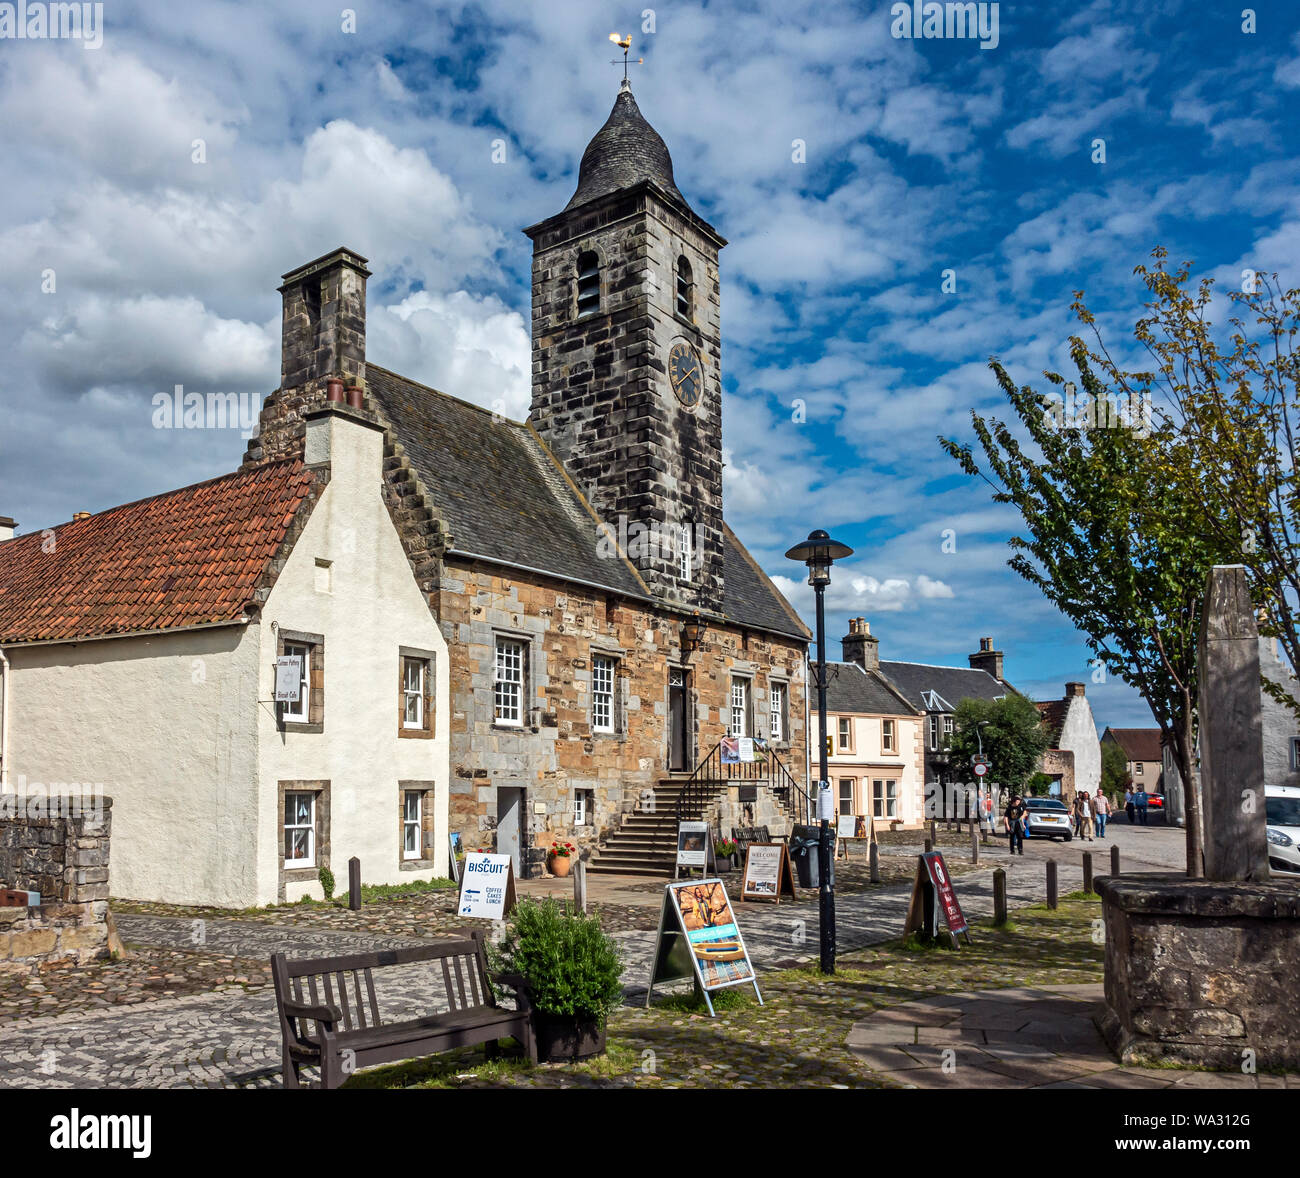 Entrance to National Trust for Scotland office and Culross Town House Sandhaven with clock tower in The Royal Burgh of Culross Fife Scotland UK Stock Photo